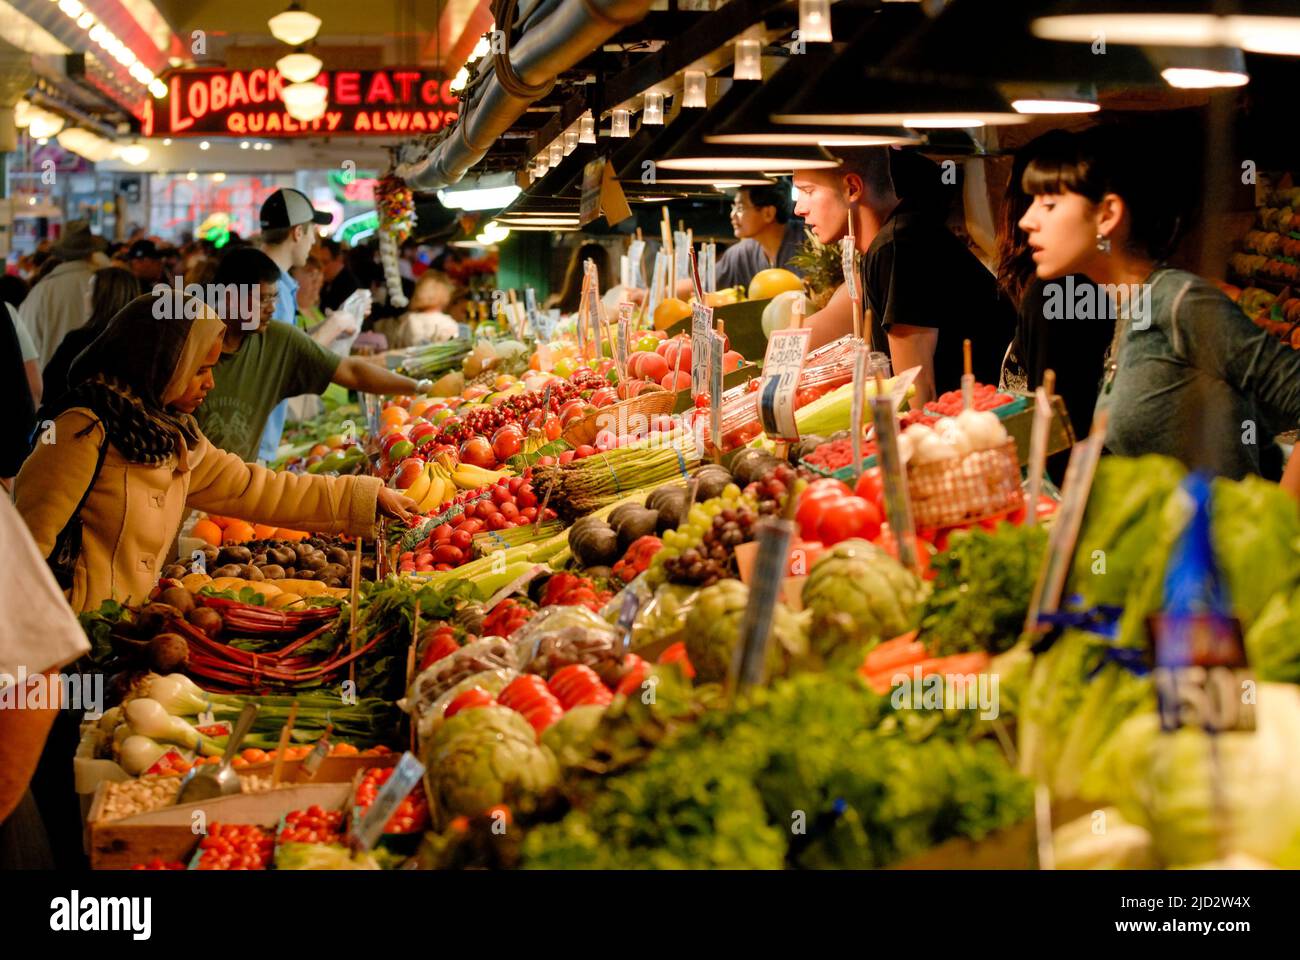 Customer inspects fresh produce at the Pike Place Market. Stock Photo